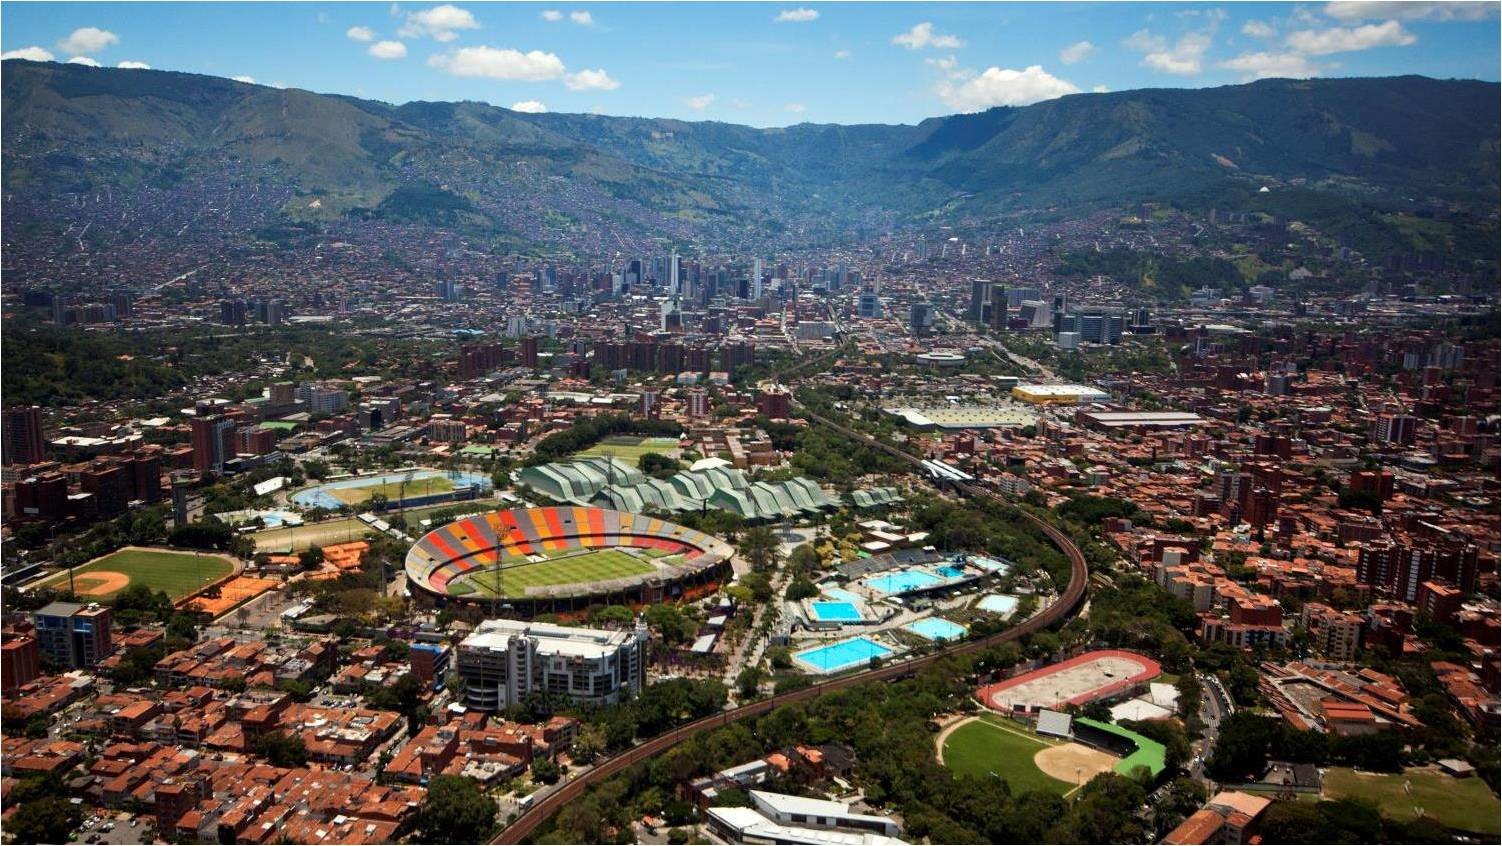 view of the laureles neighborhood with the stadium in the middle